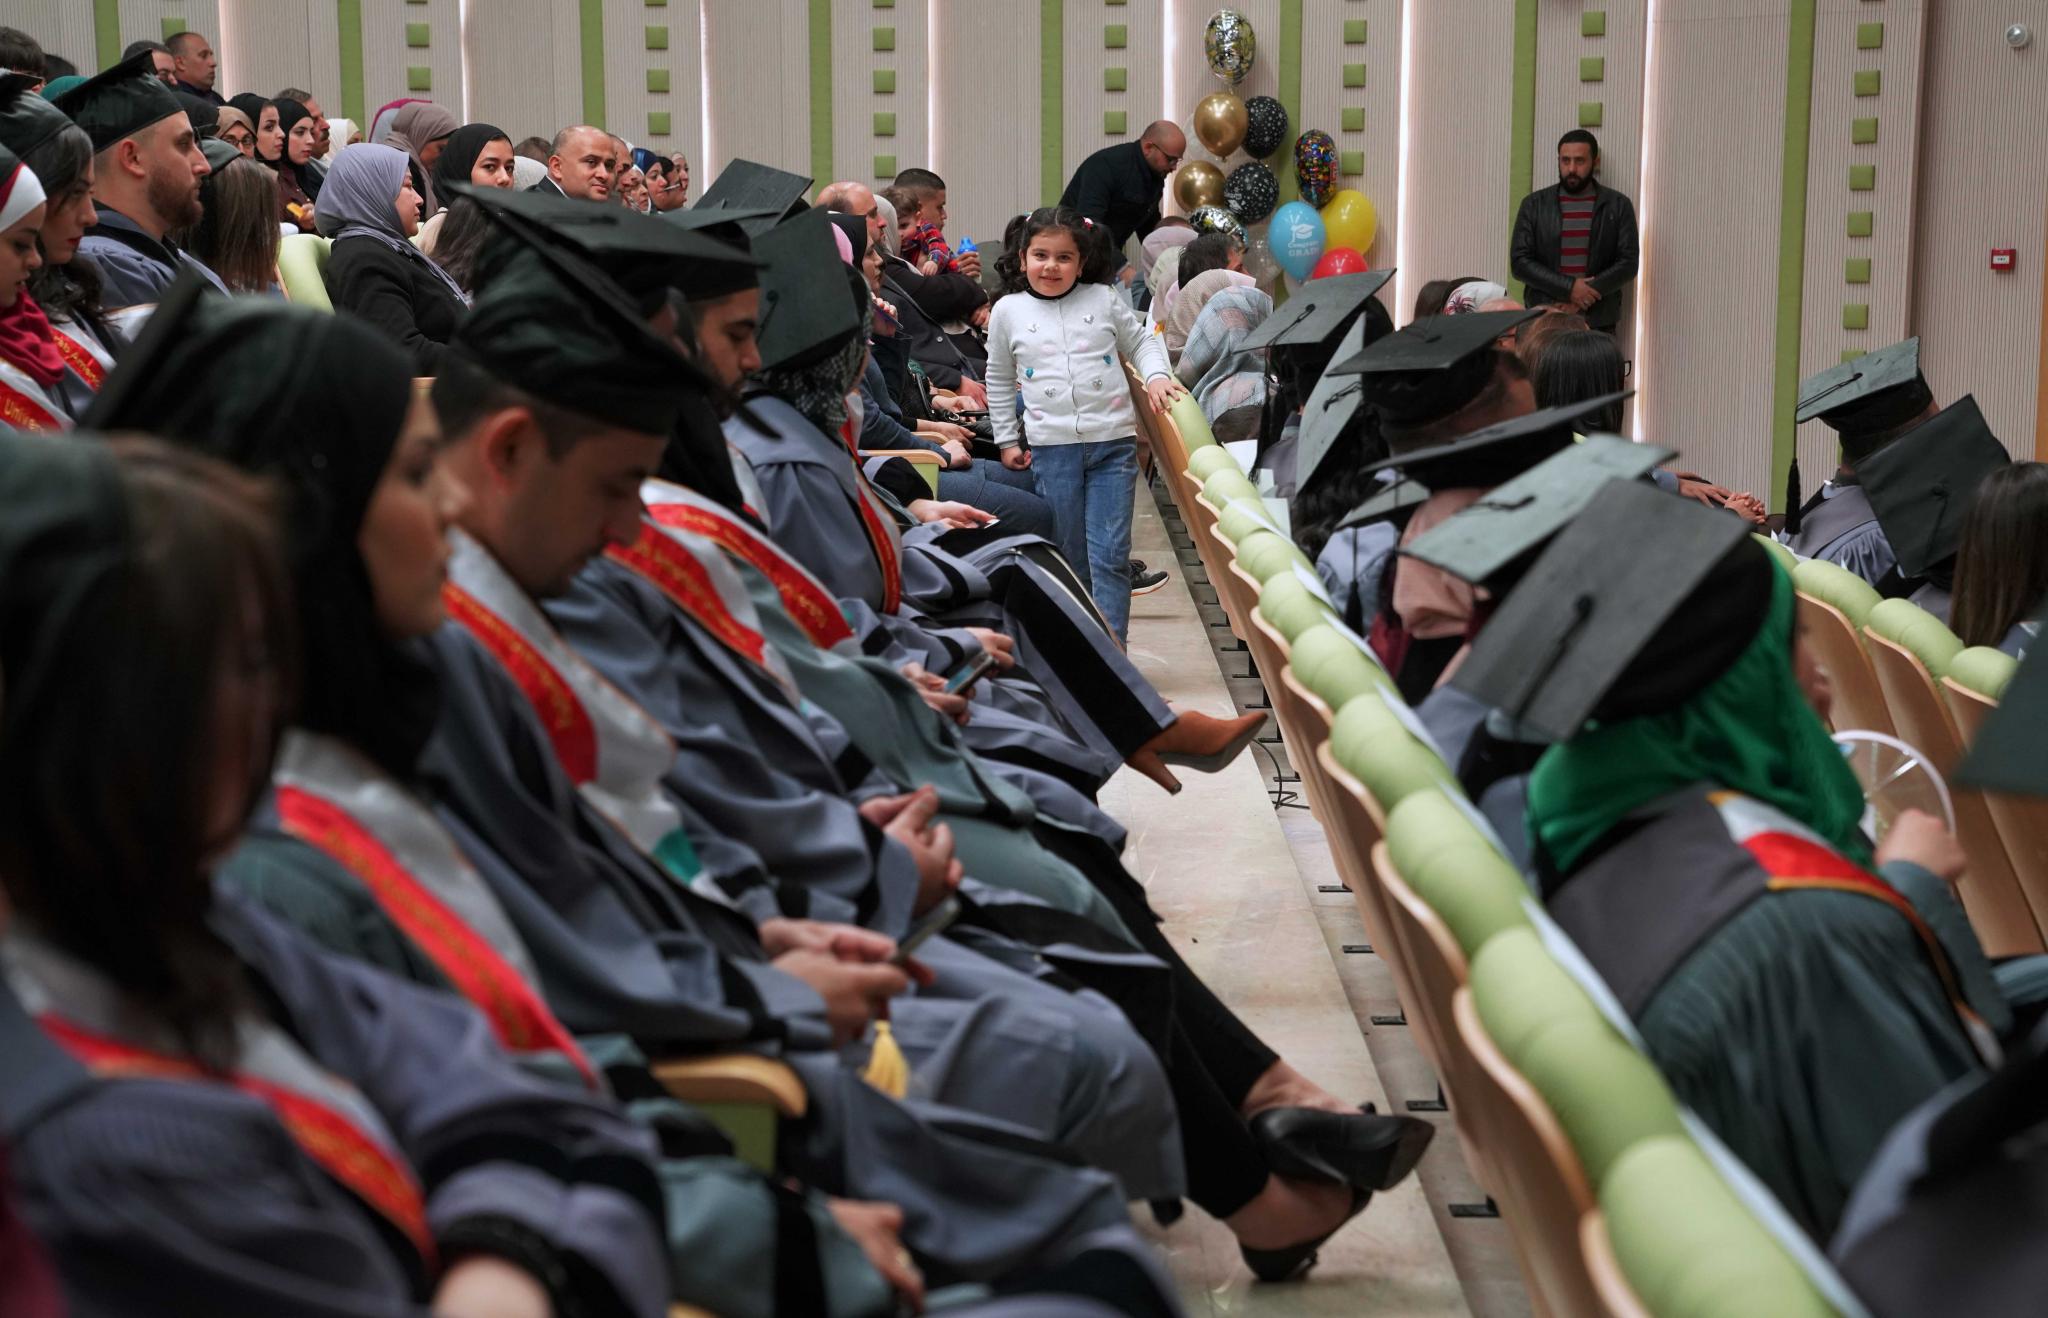 AAUP Celebrates the Graduation of the Students of the Faculty of Graduate Studies for the Academic Year 2018/2019